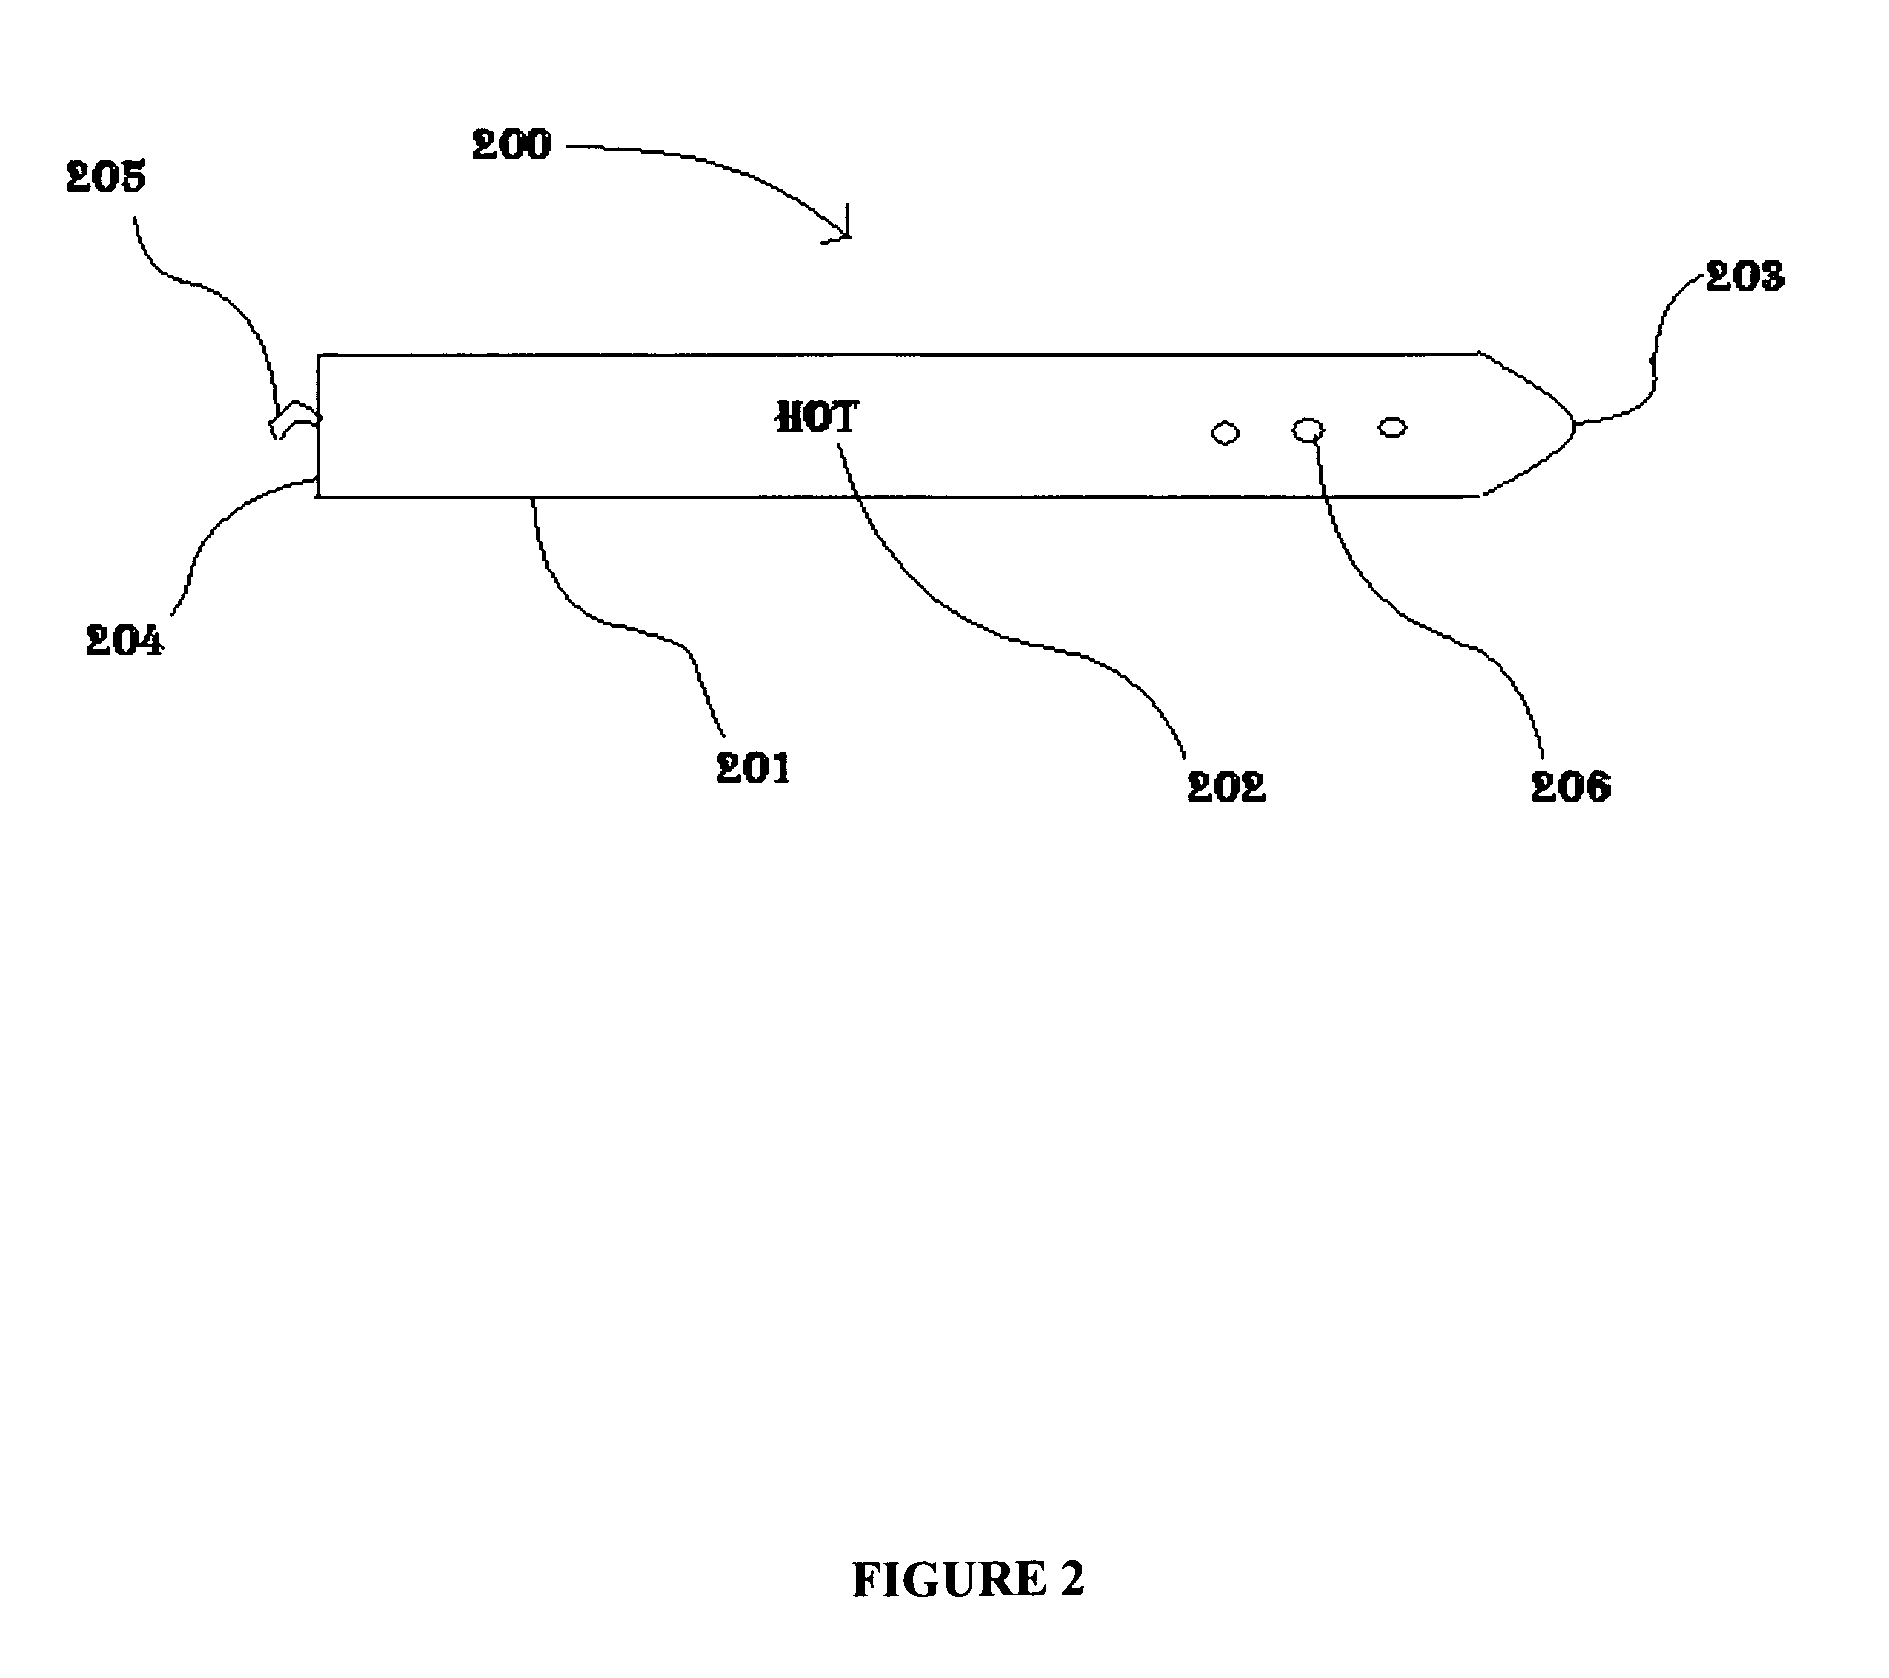 Method and device for preparation of a container containing a heated liquid of proper temperature